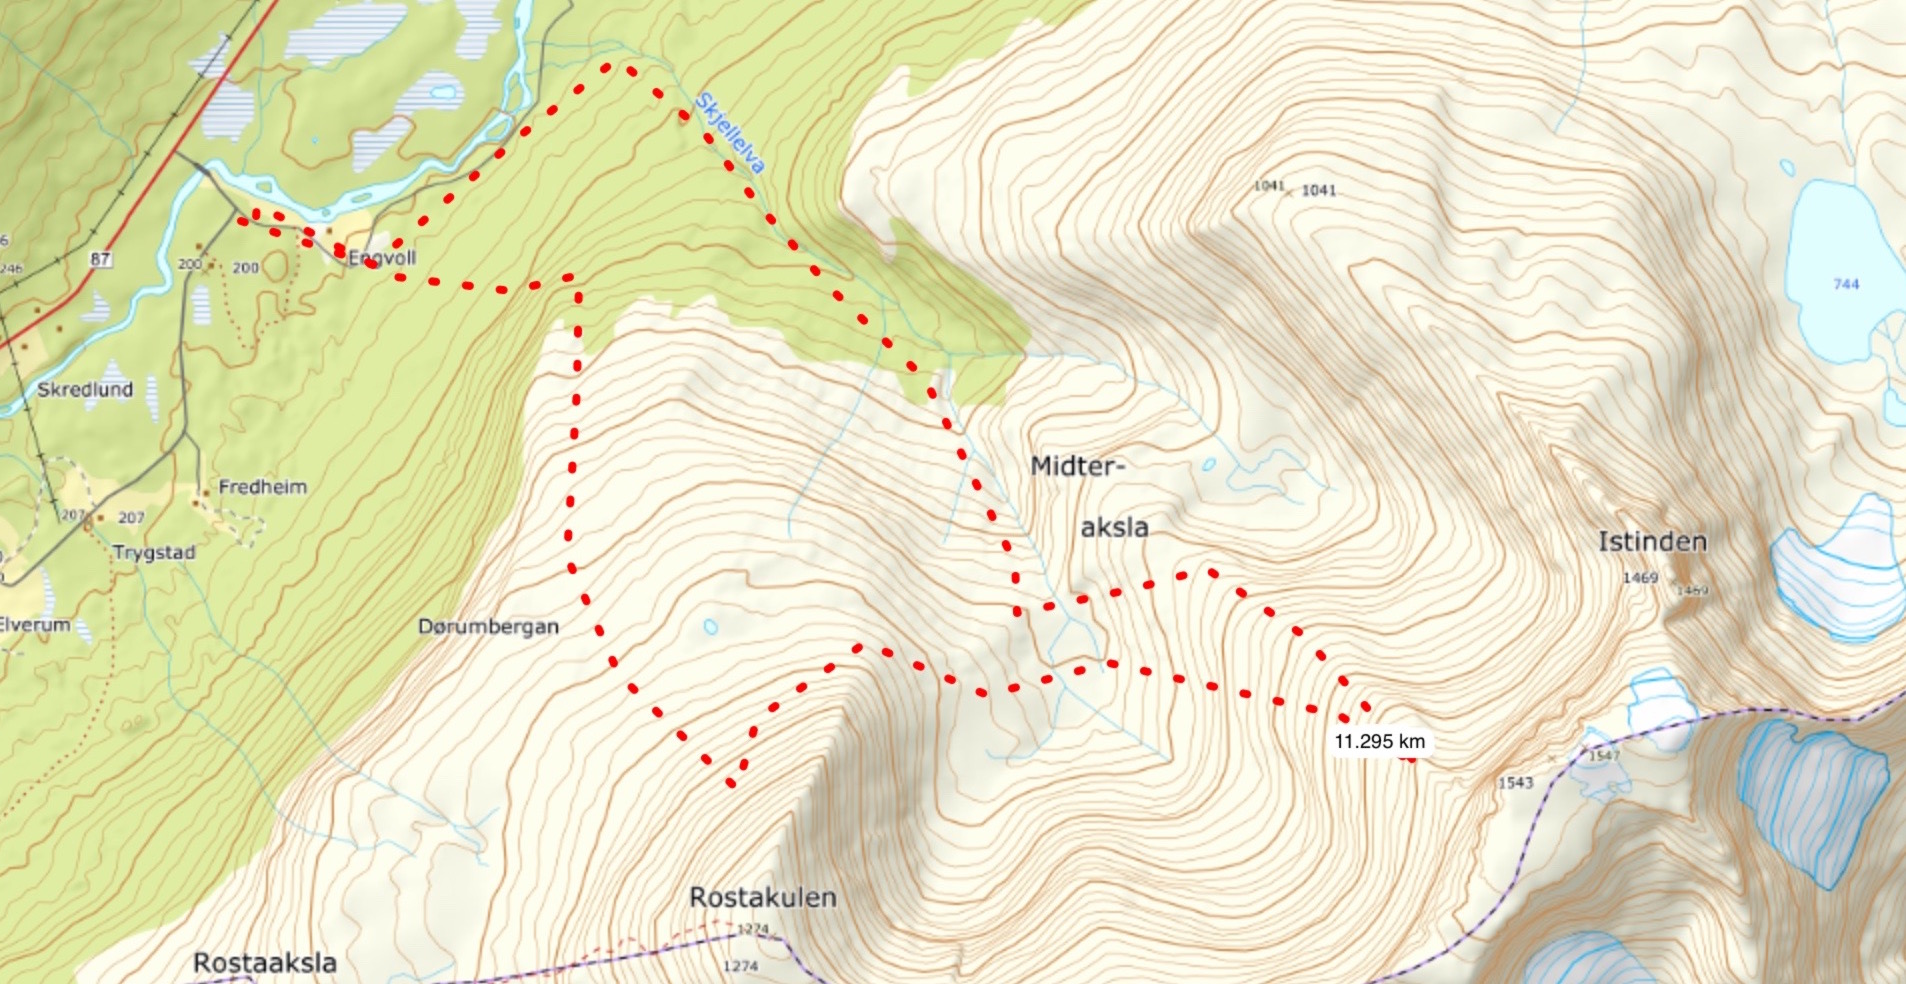 Topographical map of our climbing route on Midteraksia and Rostakulen in Tamokdalen Backcountry